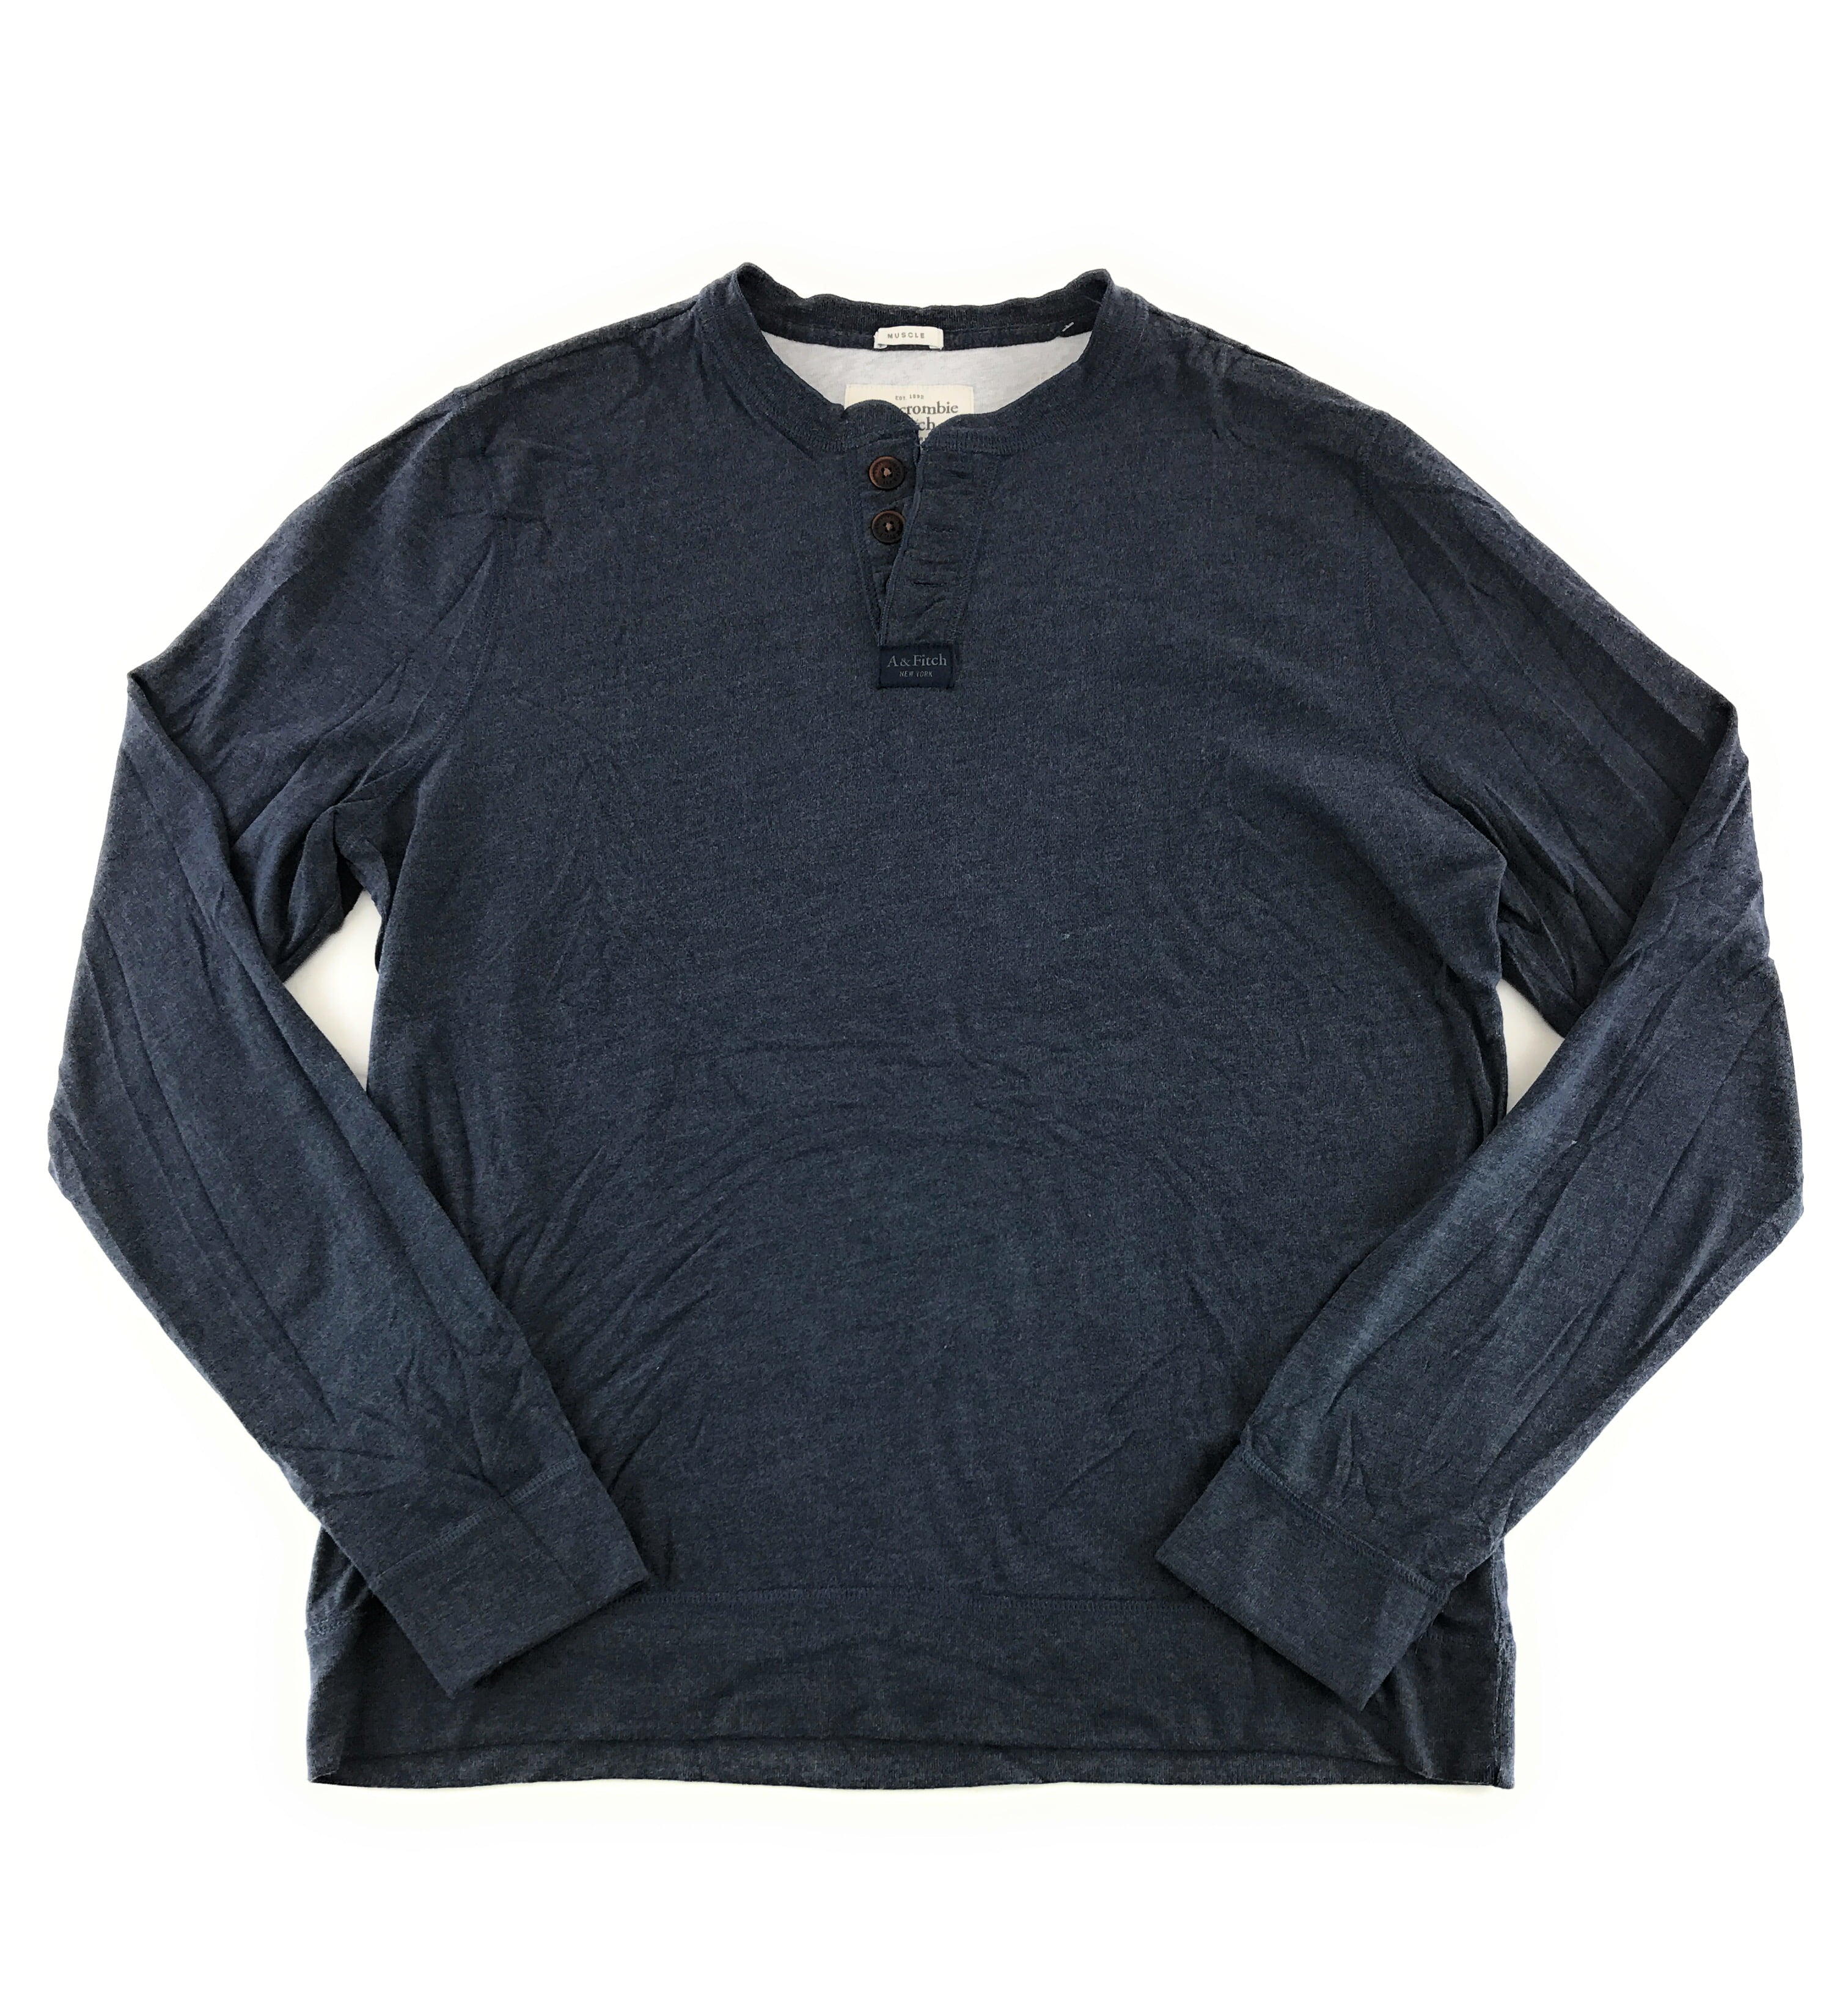 abercrombie thermal shirt